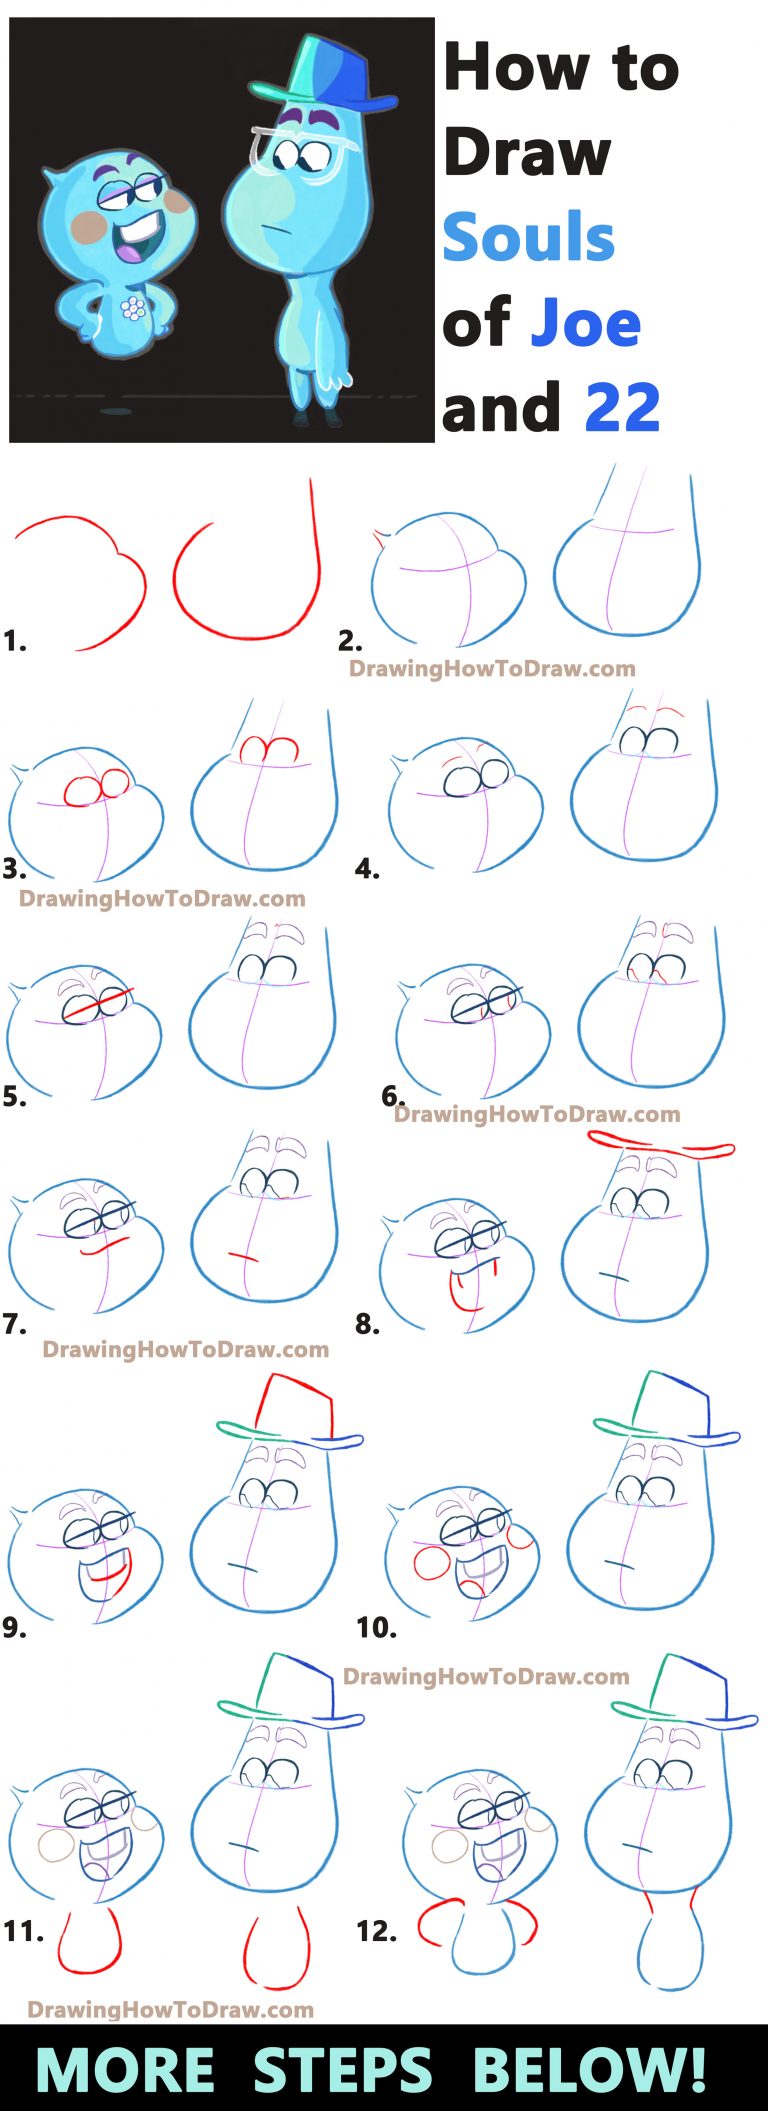 Best How To Draw Pixar Characters Step By Step in the world The ultimate guide 